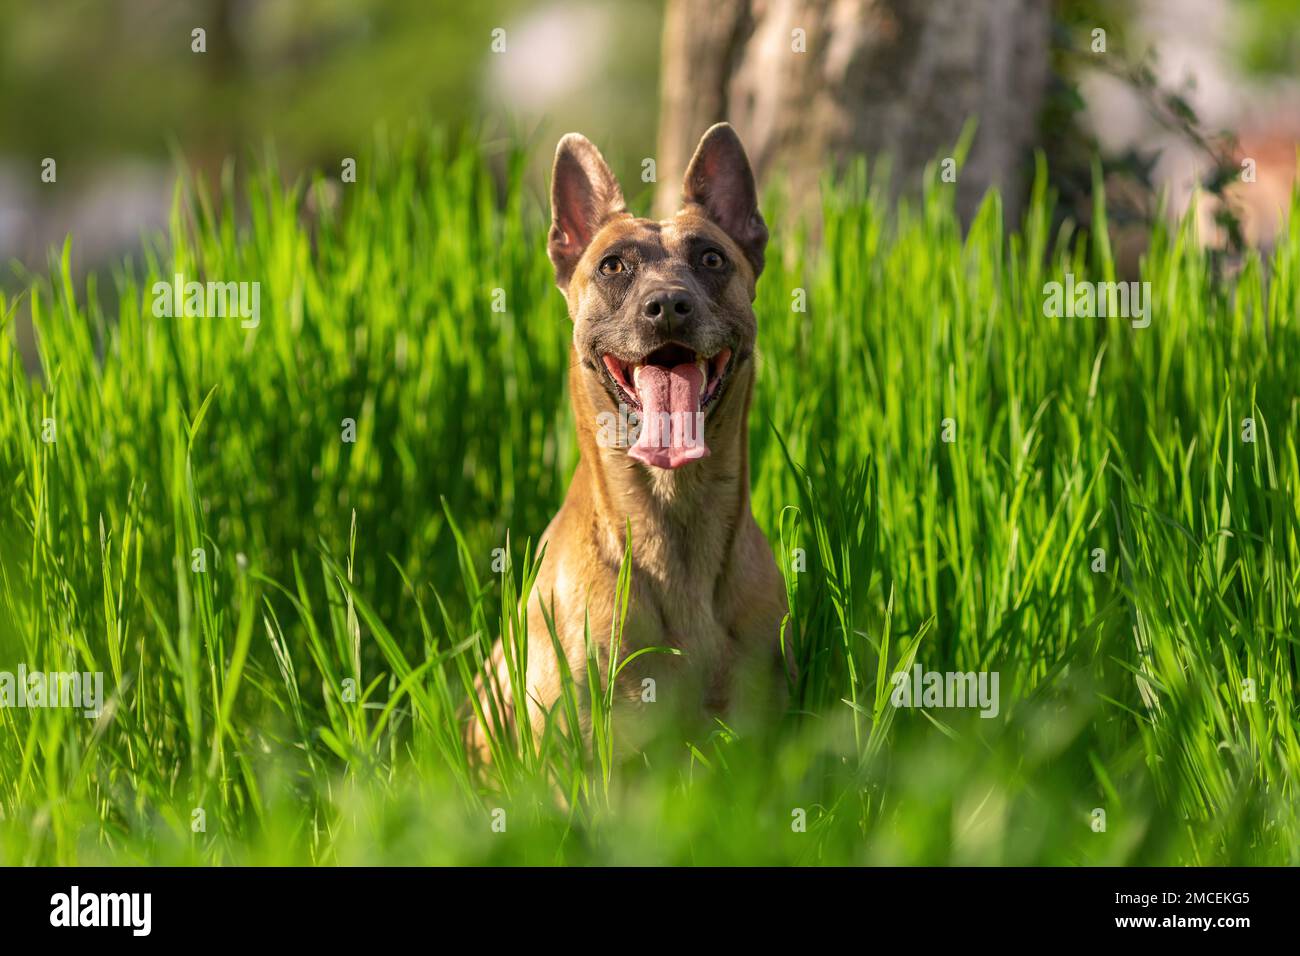 Funny smiling dog of belgian malinois breed sitting in the green grass at sun outdoors Stock Photo